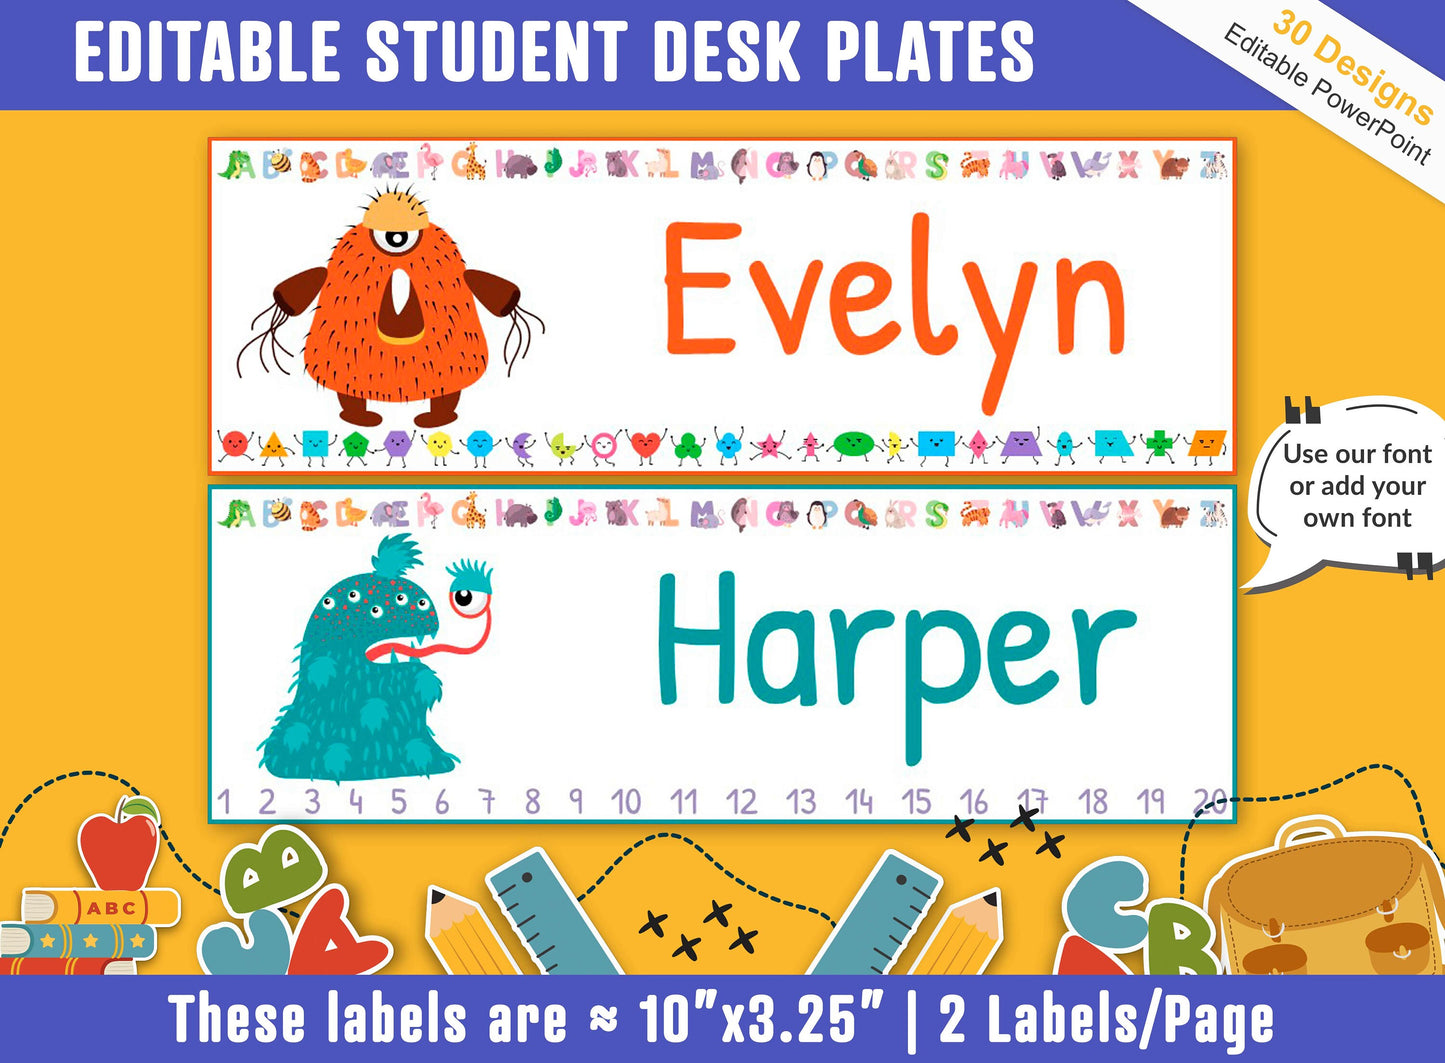 Student Desk Plates, 30 Printable/Editable Monster Classroom Name Tags & Name Plates for Student; a Helpful Addition to Your Classroom